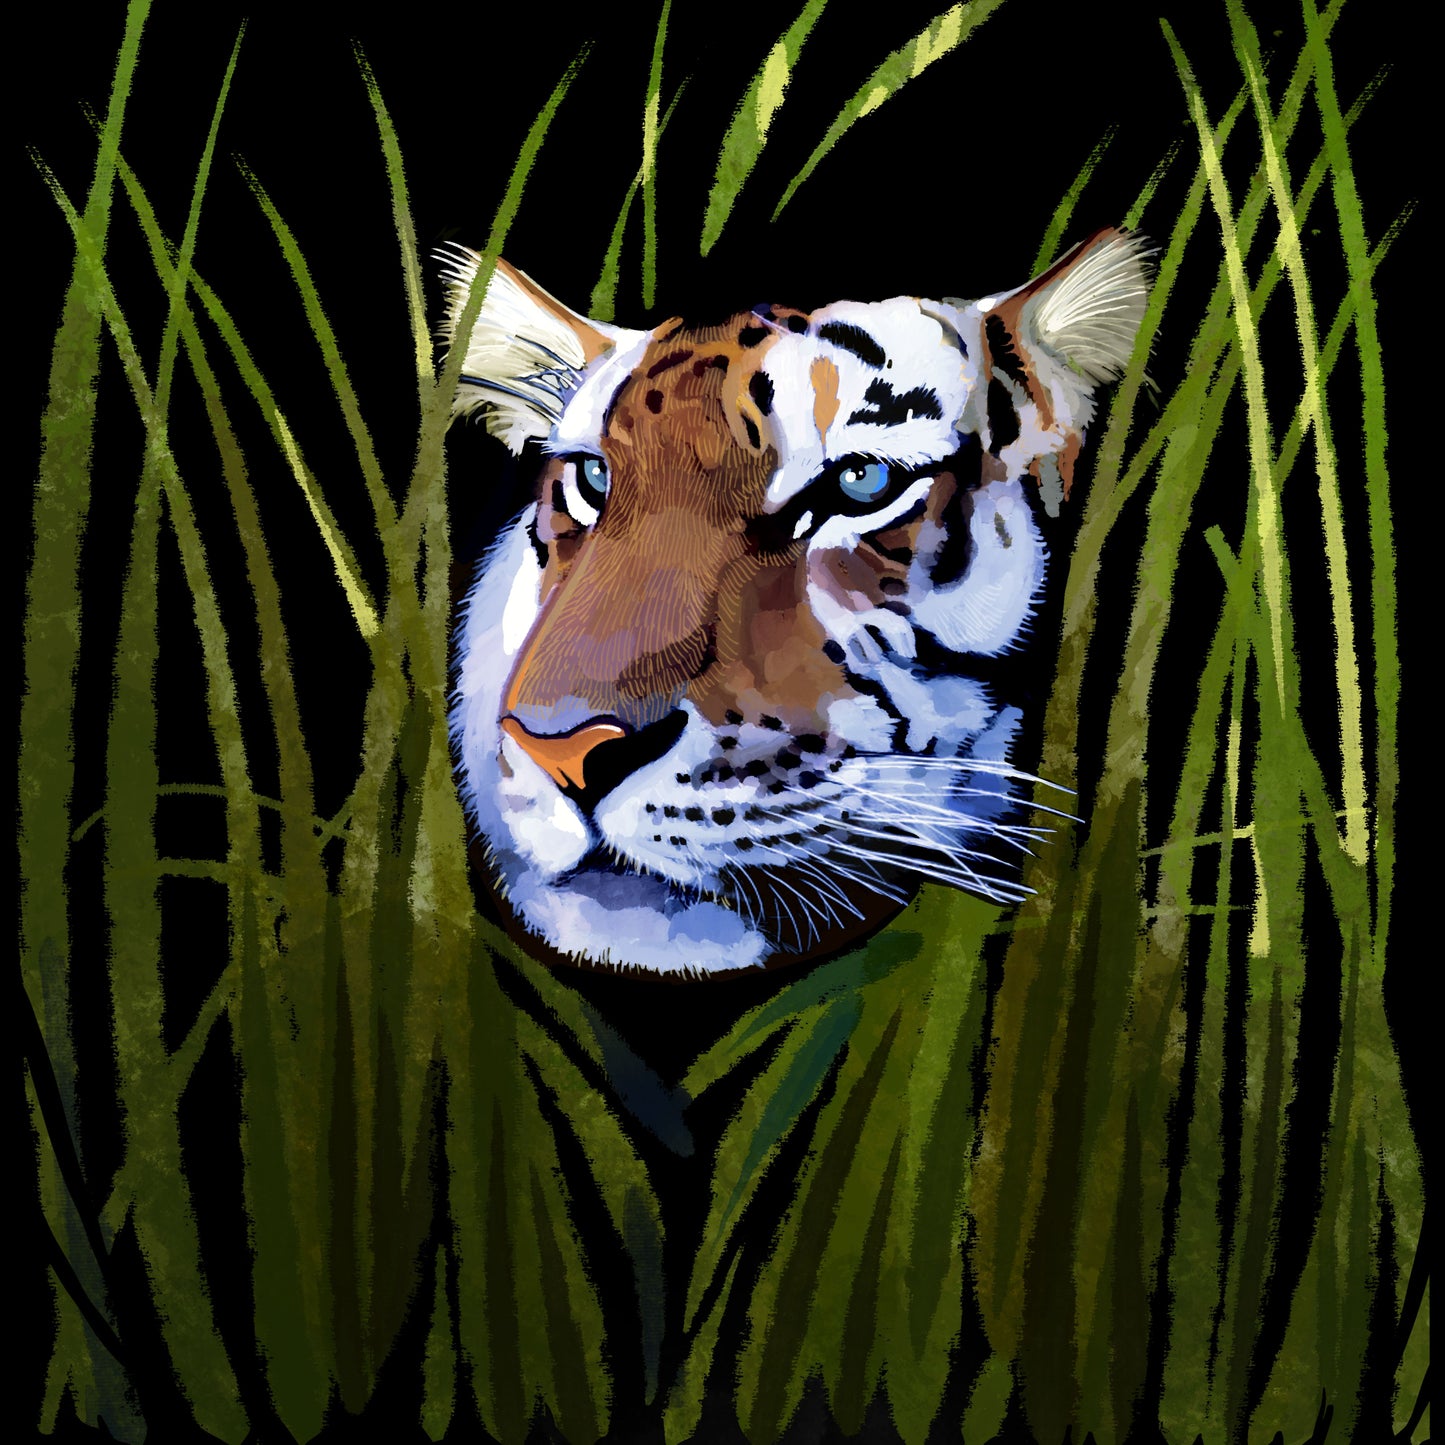 Tiger in Tall Grass - Illustrated Print by Thomas Little